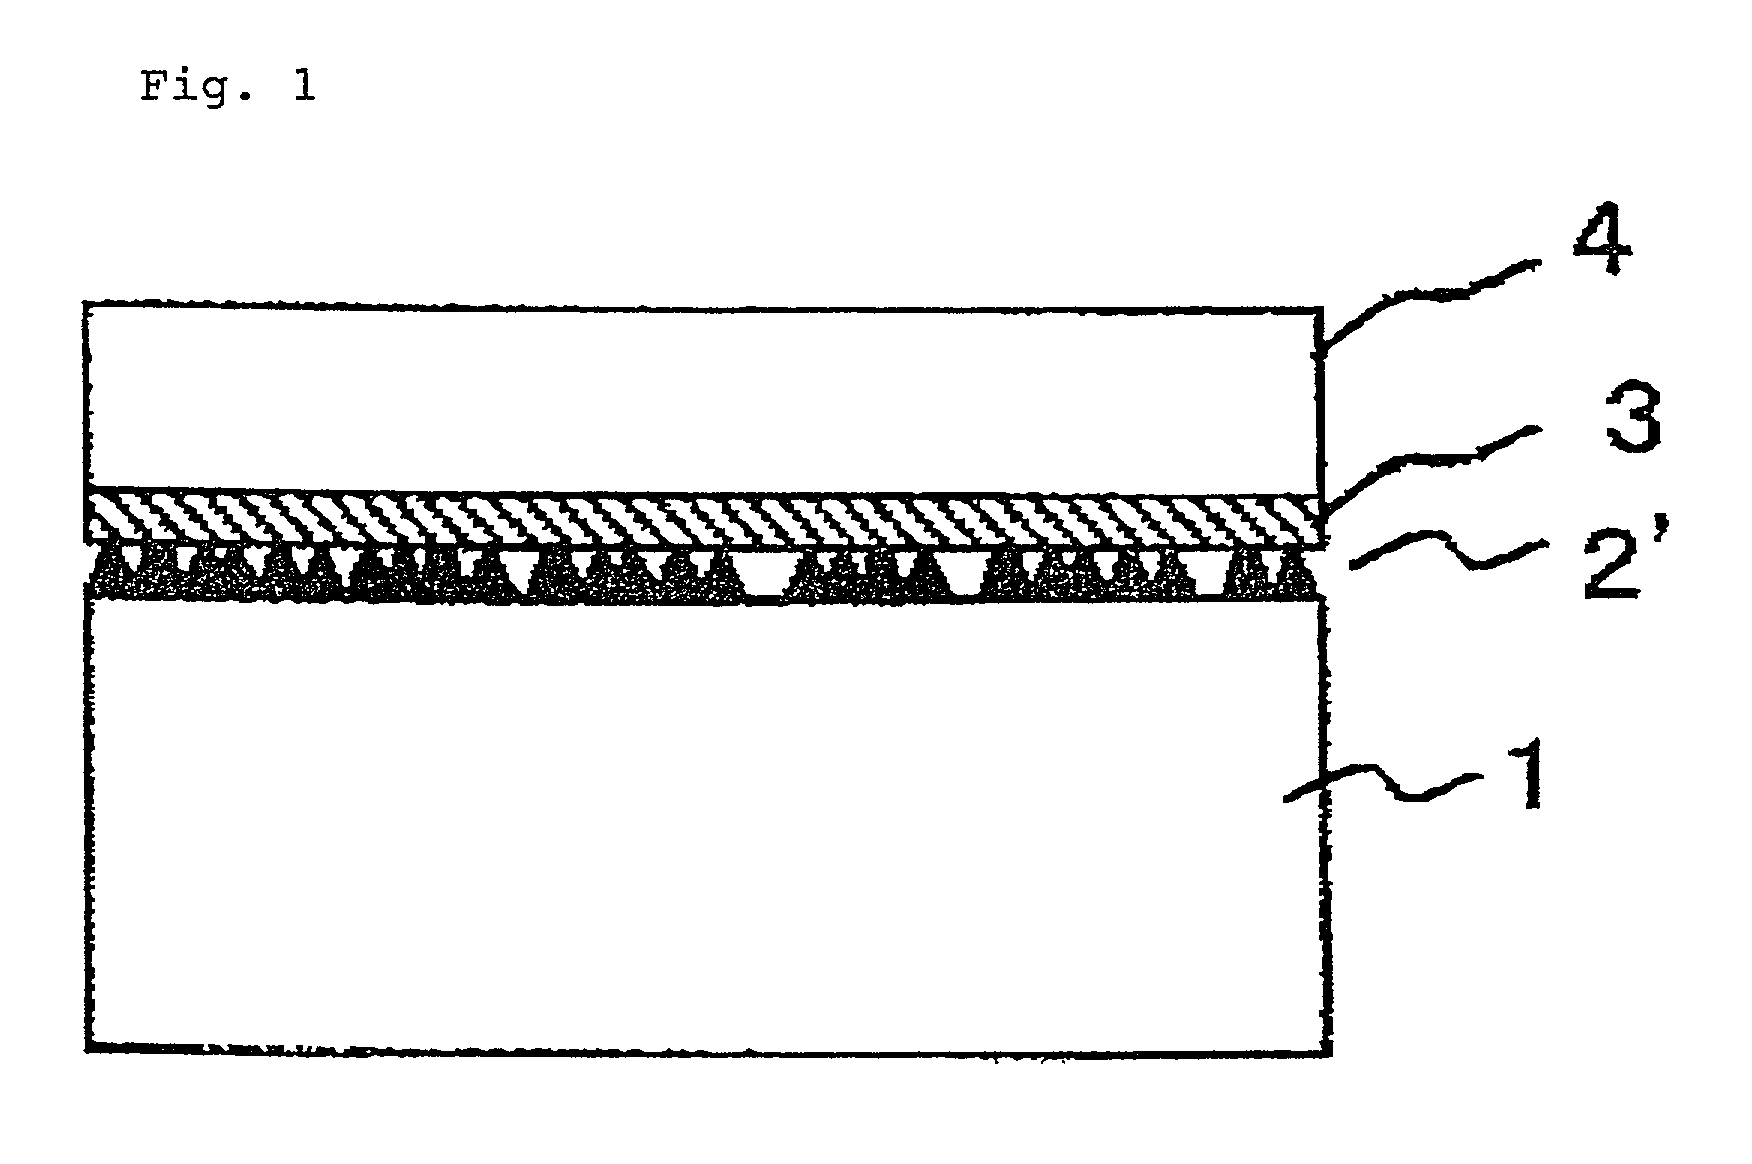 Semiconductor substrate made of group III nitride, and process for manufacture thereof